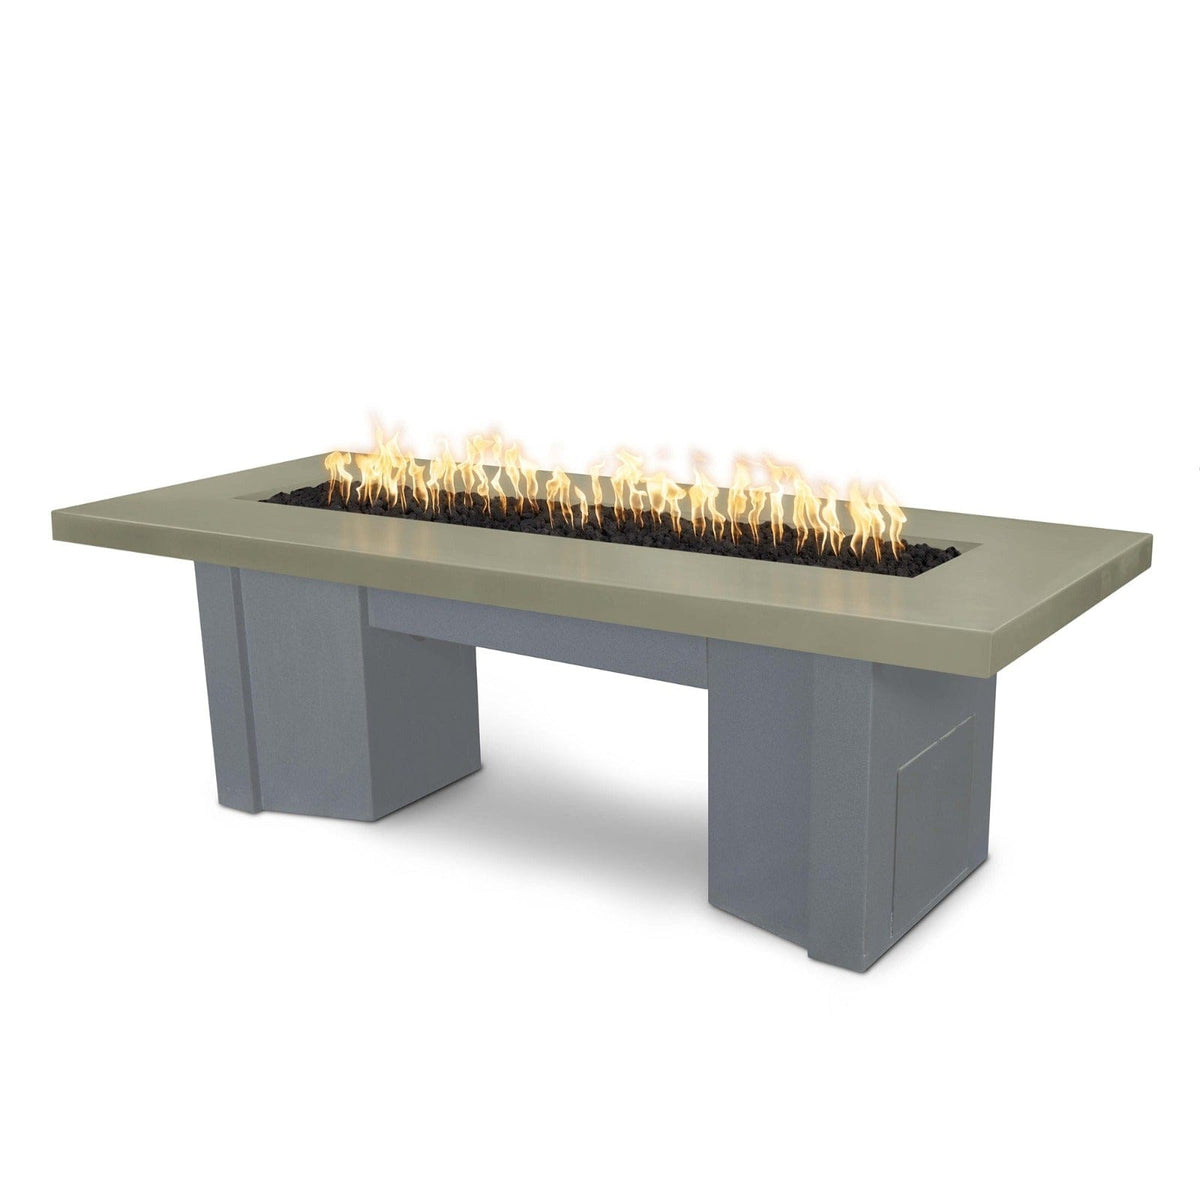 The Outdoor Plus Fire Features Ash (-ASH) / Gray Powder Coated Steel (-GRY) The Outdoor Plus 60&quot; Alameda Fire Table Smooth Concrete in Liquid Propane - Flame Sense System with Push Button Spark Igniter / OPT-ALMGFRC60FSEN-LP